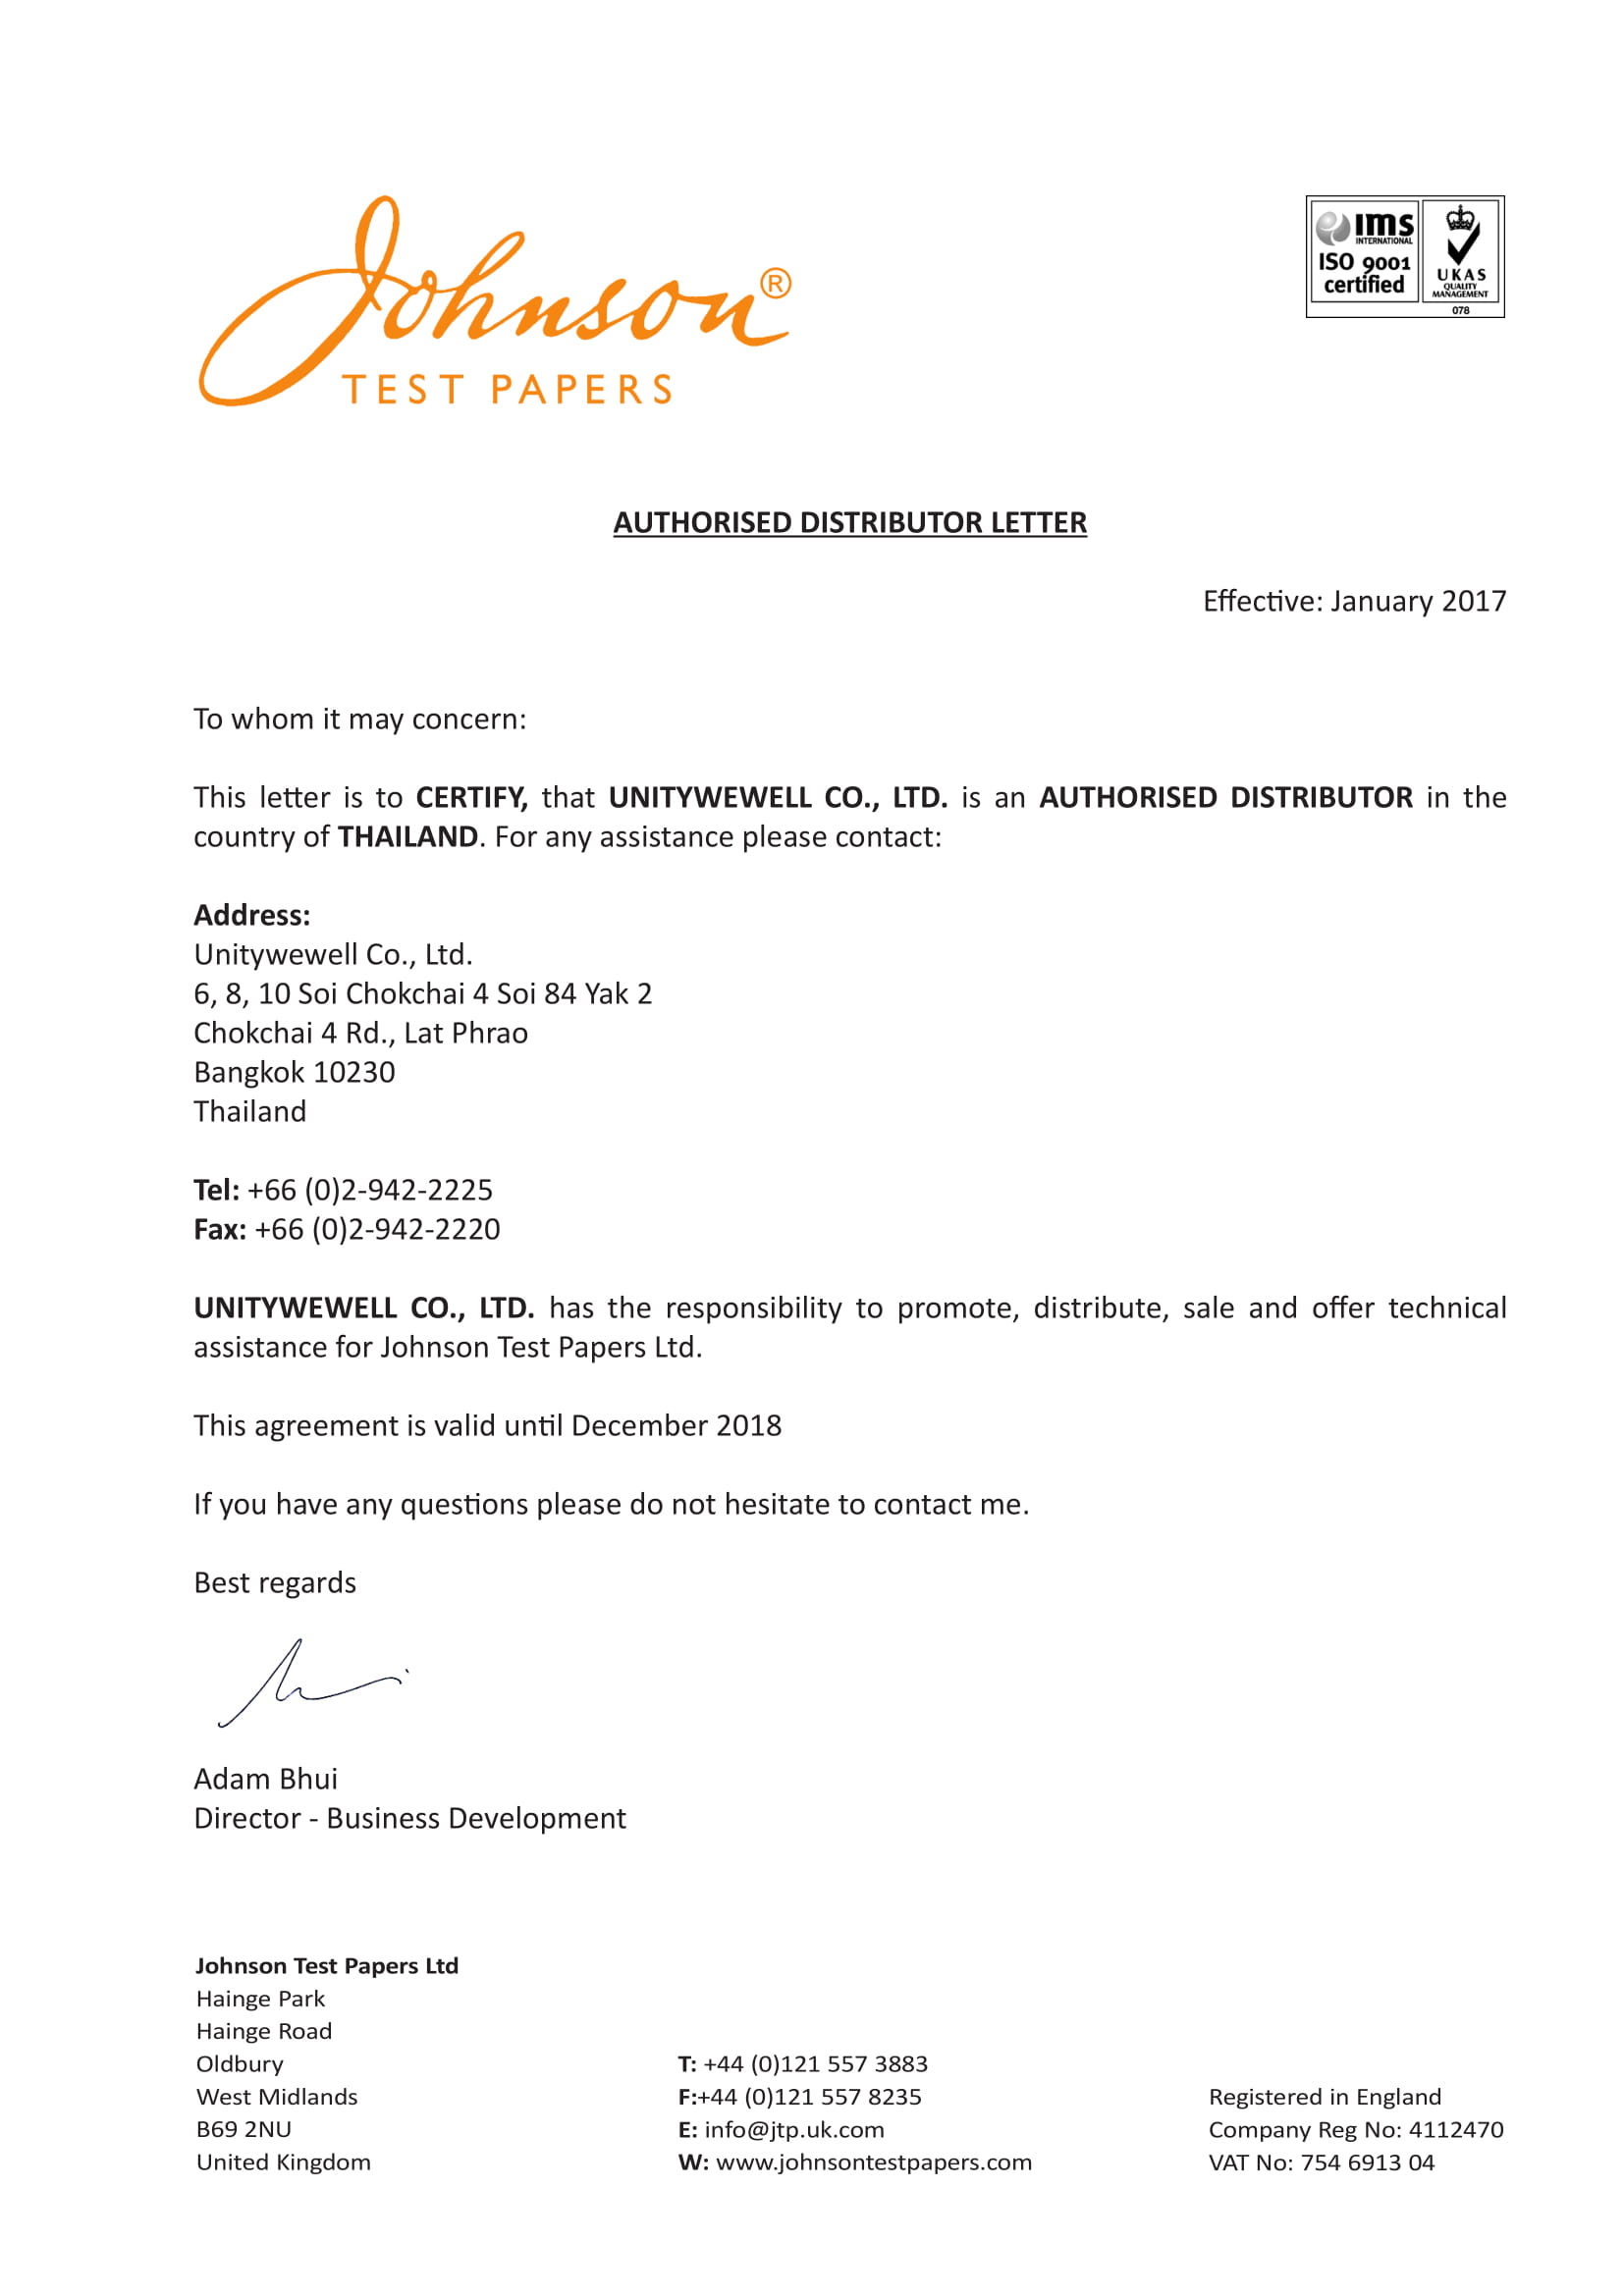 6+ Official Distributor Letter Examples - PDF | Examples
